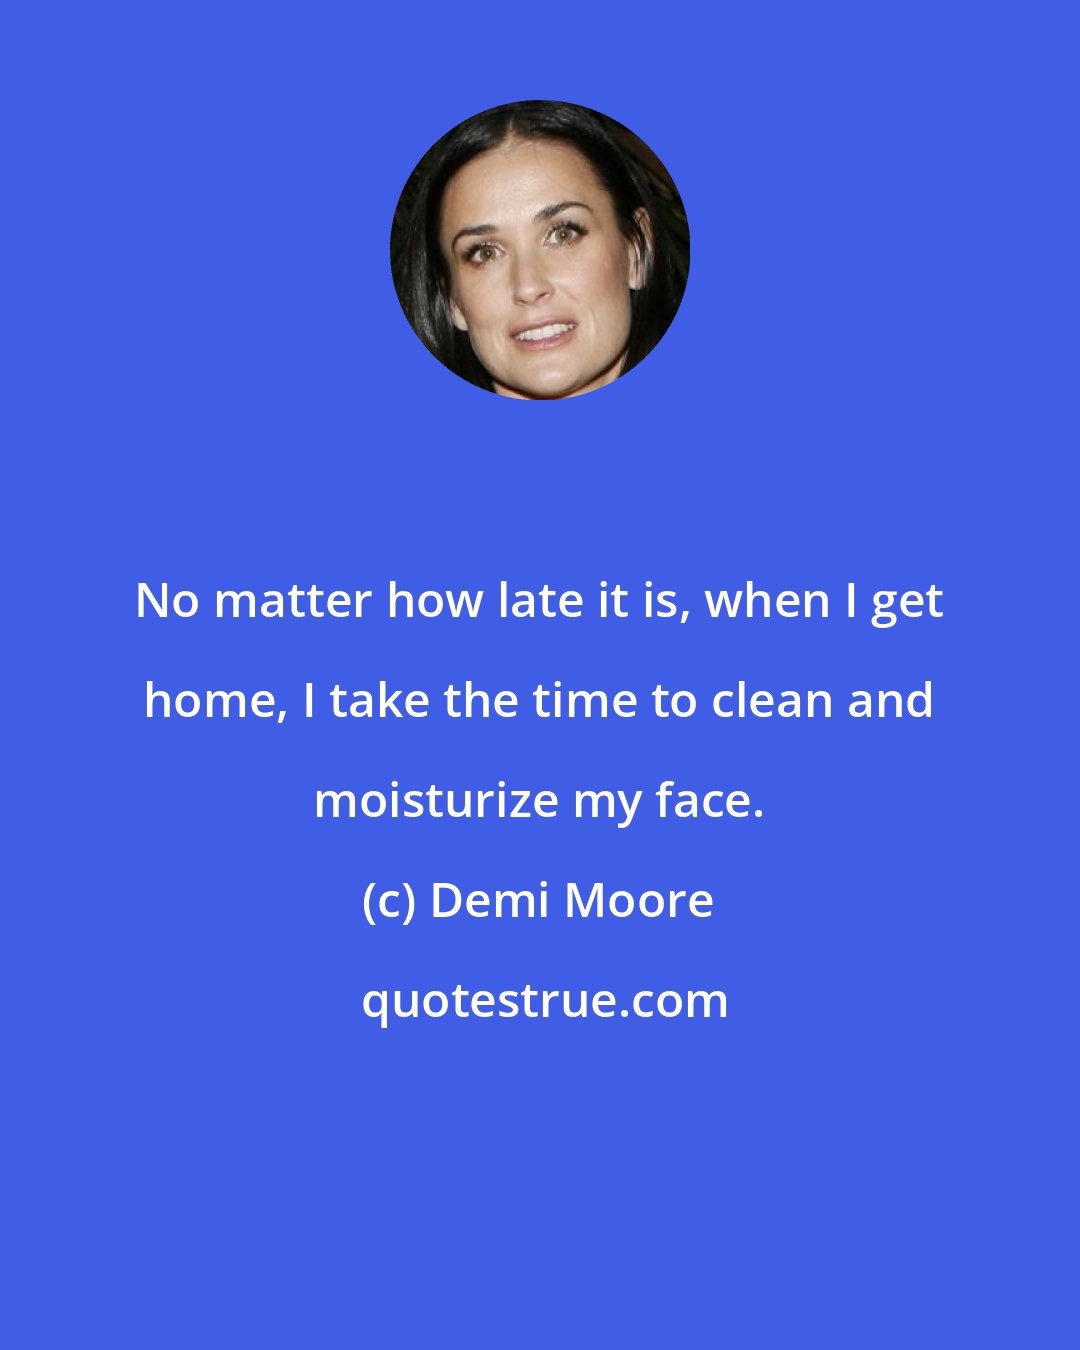 Demi Moore: No matter how late it is, when I get home, I take the time to clean and moisturize my face.